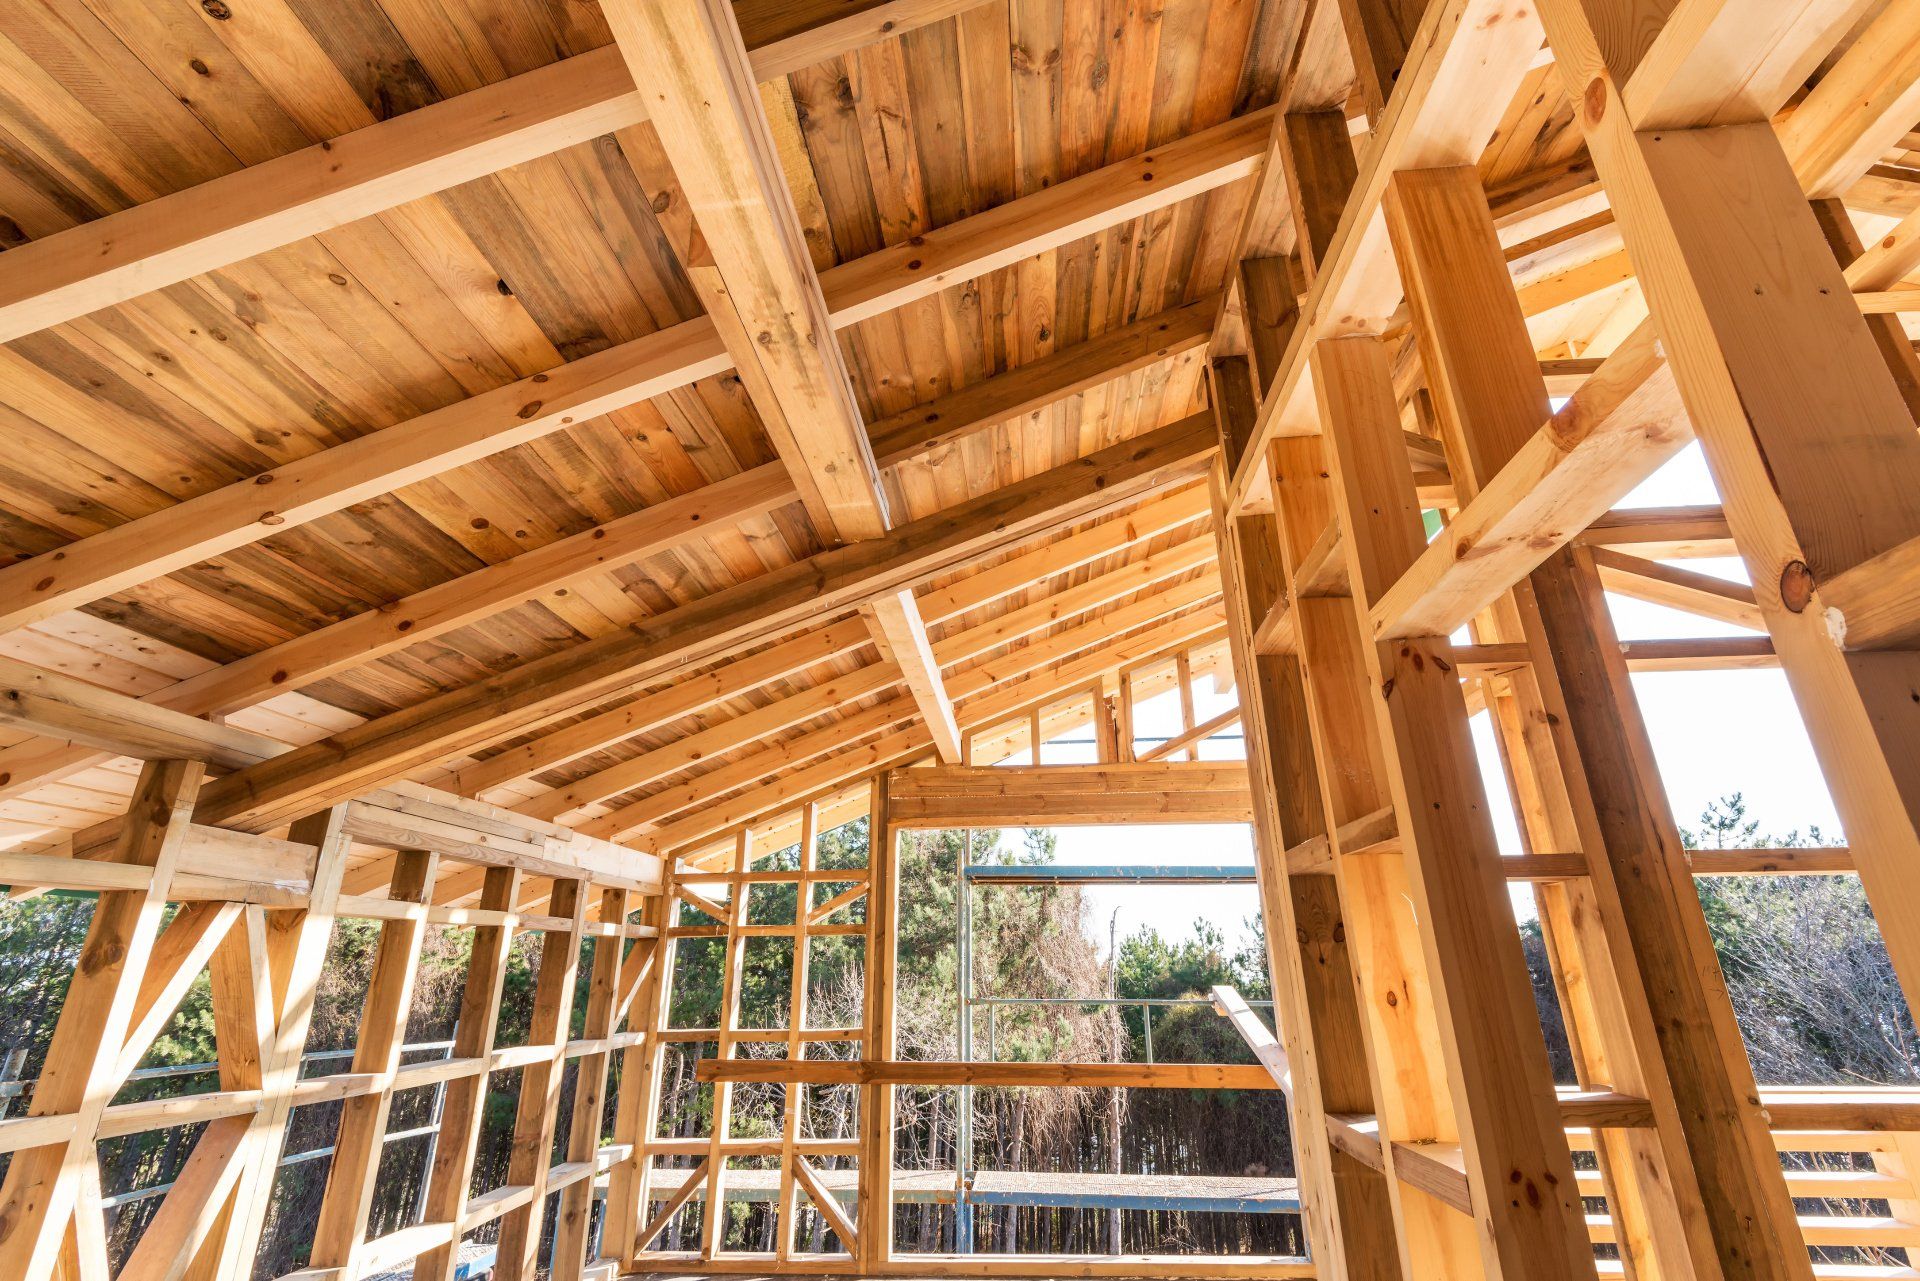 A skeletal structure of wooden beams and pillars forming the foundation of a future home.